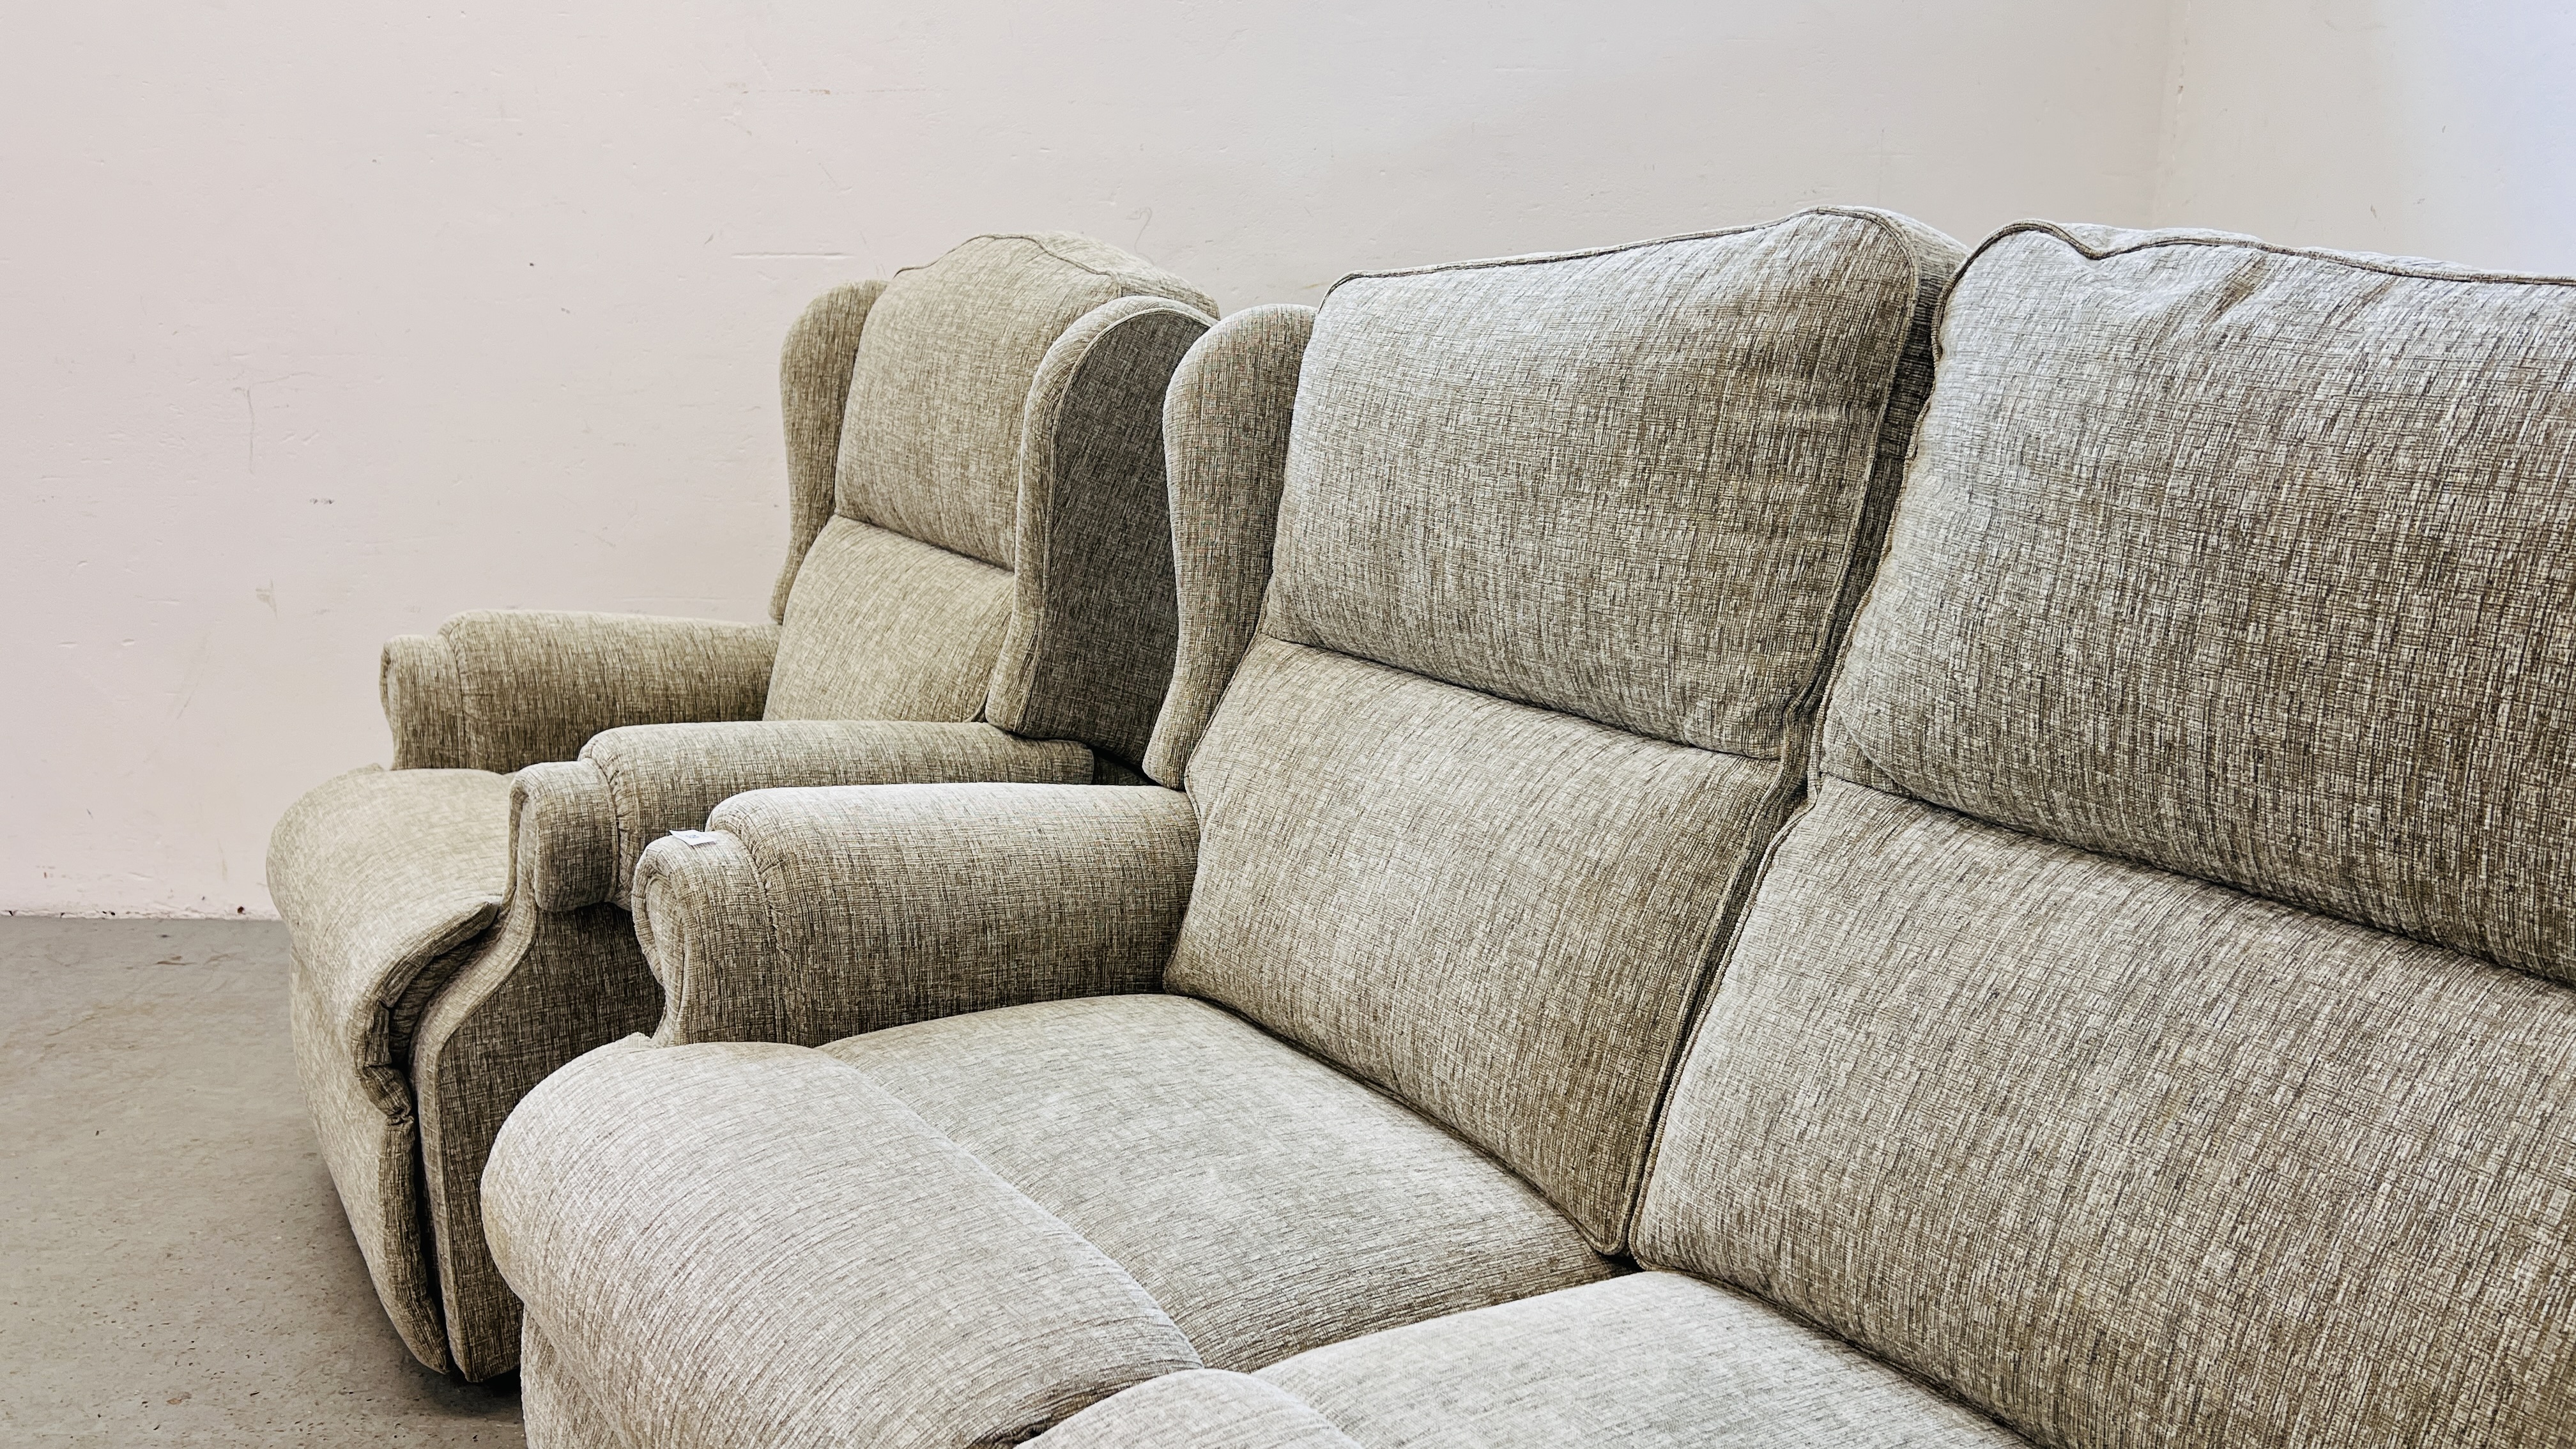 A GOOD QUALITY "SHERBORNE" TWO SEATER SOFA W 140CM X D 82CM X H 94CM ALONG WITH A MATCHING ARMCHAIR. - Image 6 of 14